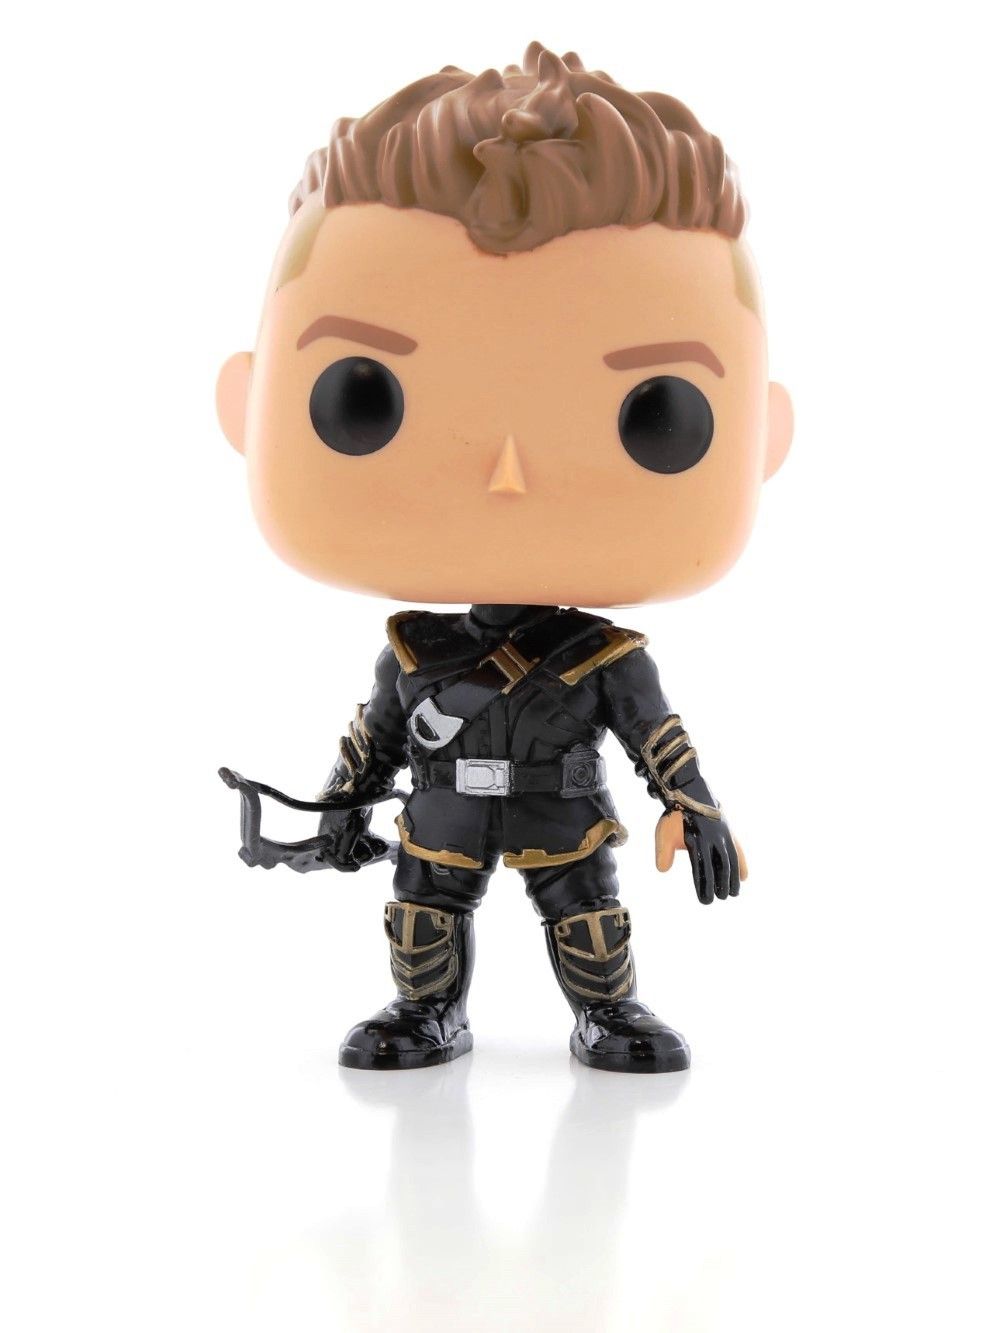 Funko Pop Avengers End Game Hawkeye Vinyl Figure (with Chase*)